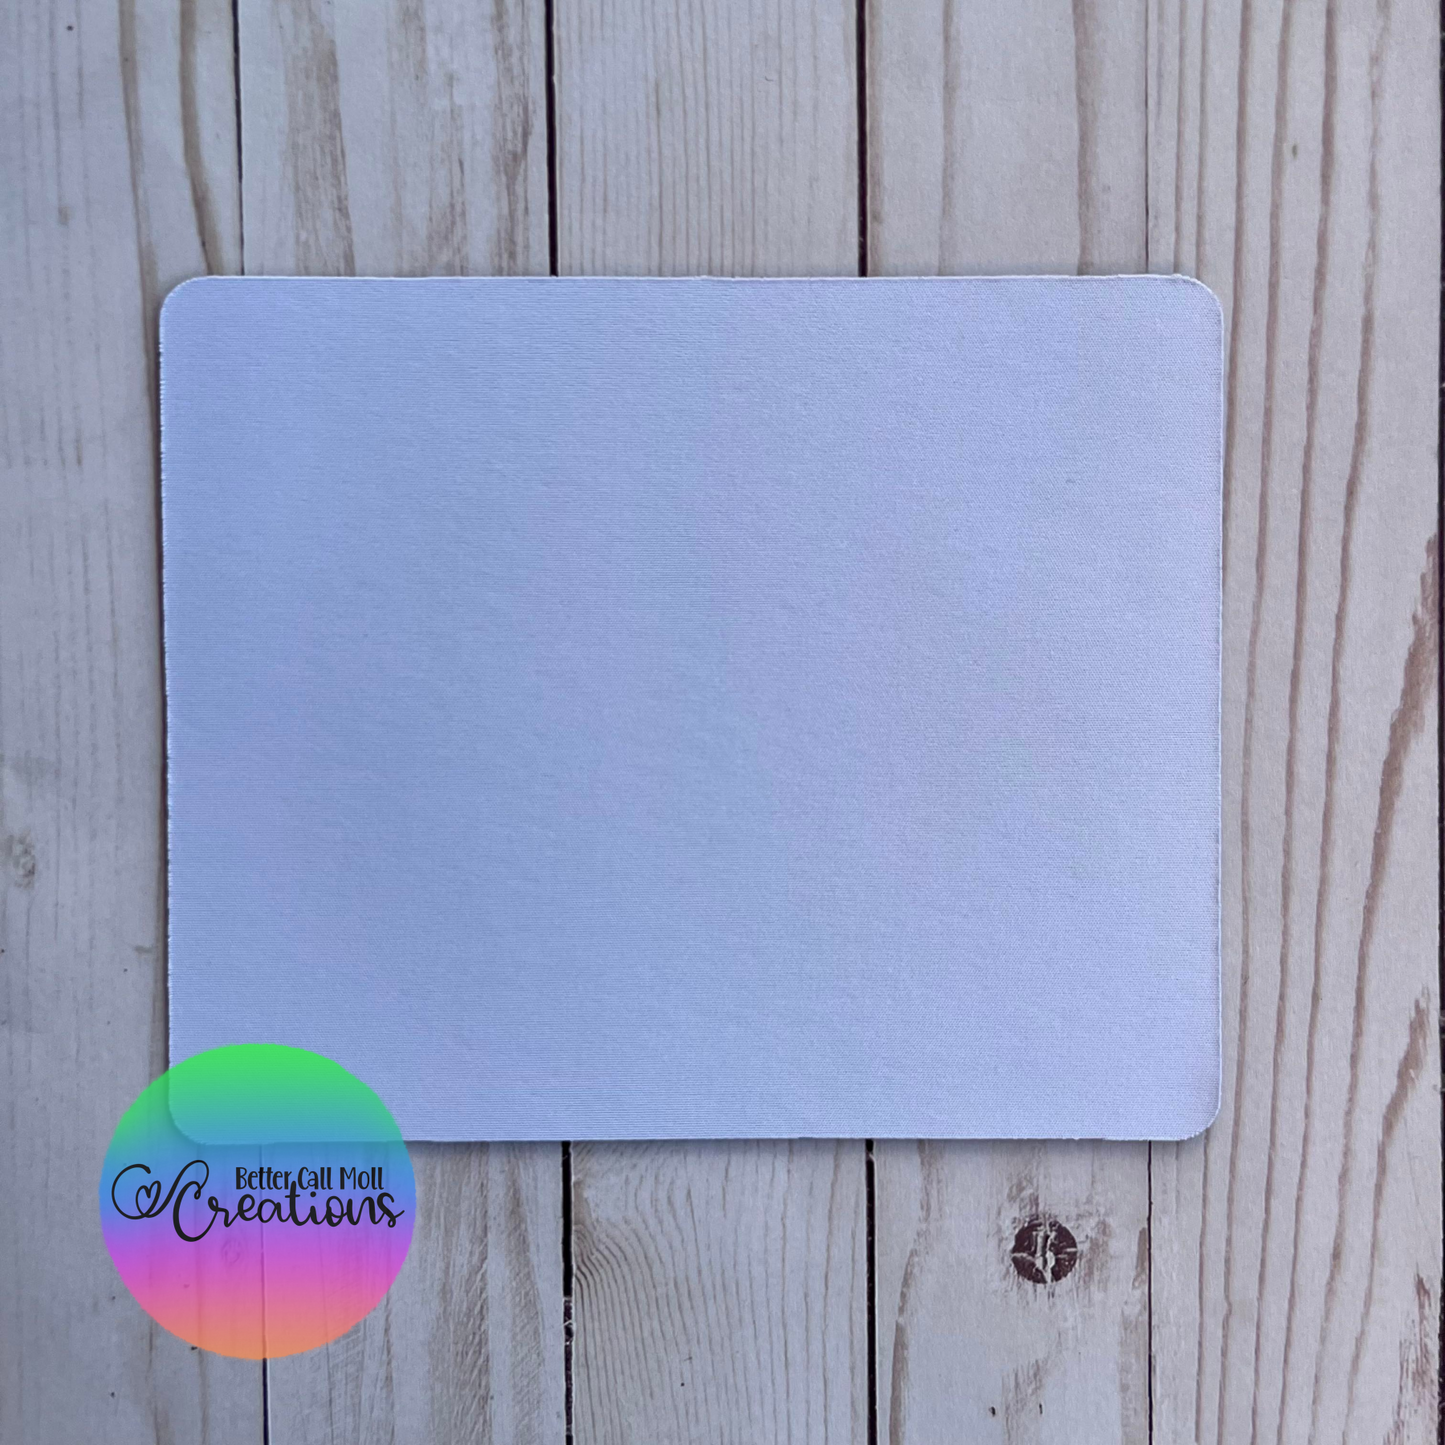 Mouse Pad Sublimation Blank